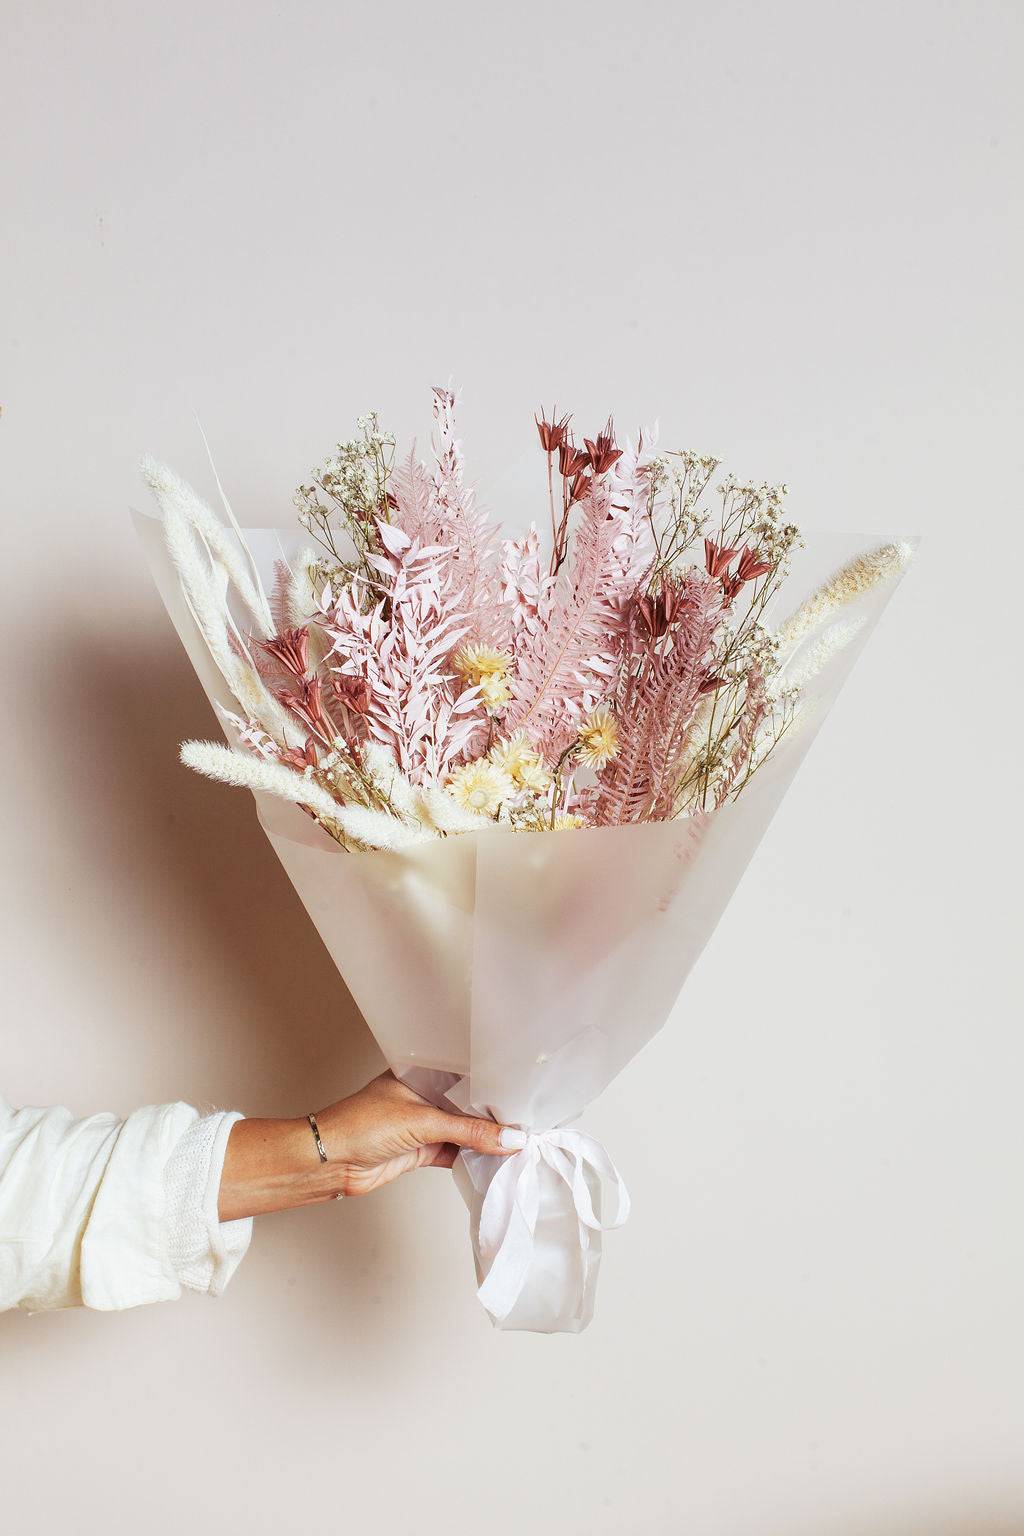 Idlewild Floral Co. Dried Bouquets & Flower Stems, 7 Options on Food52